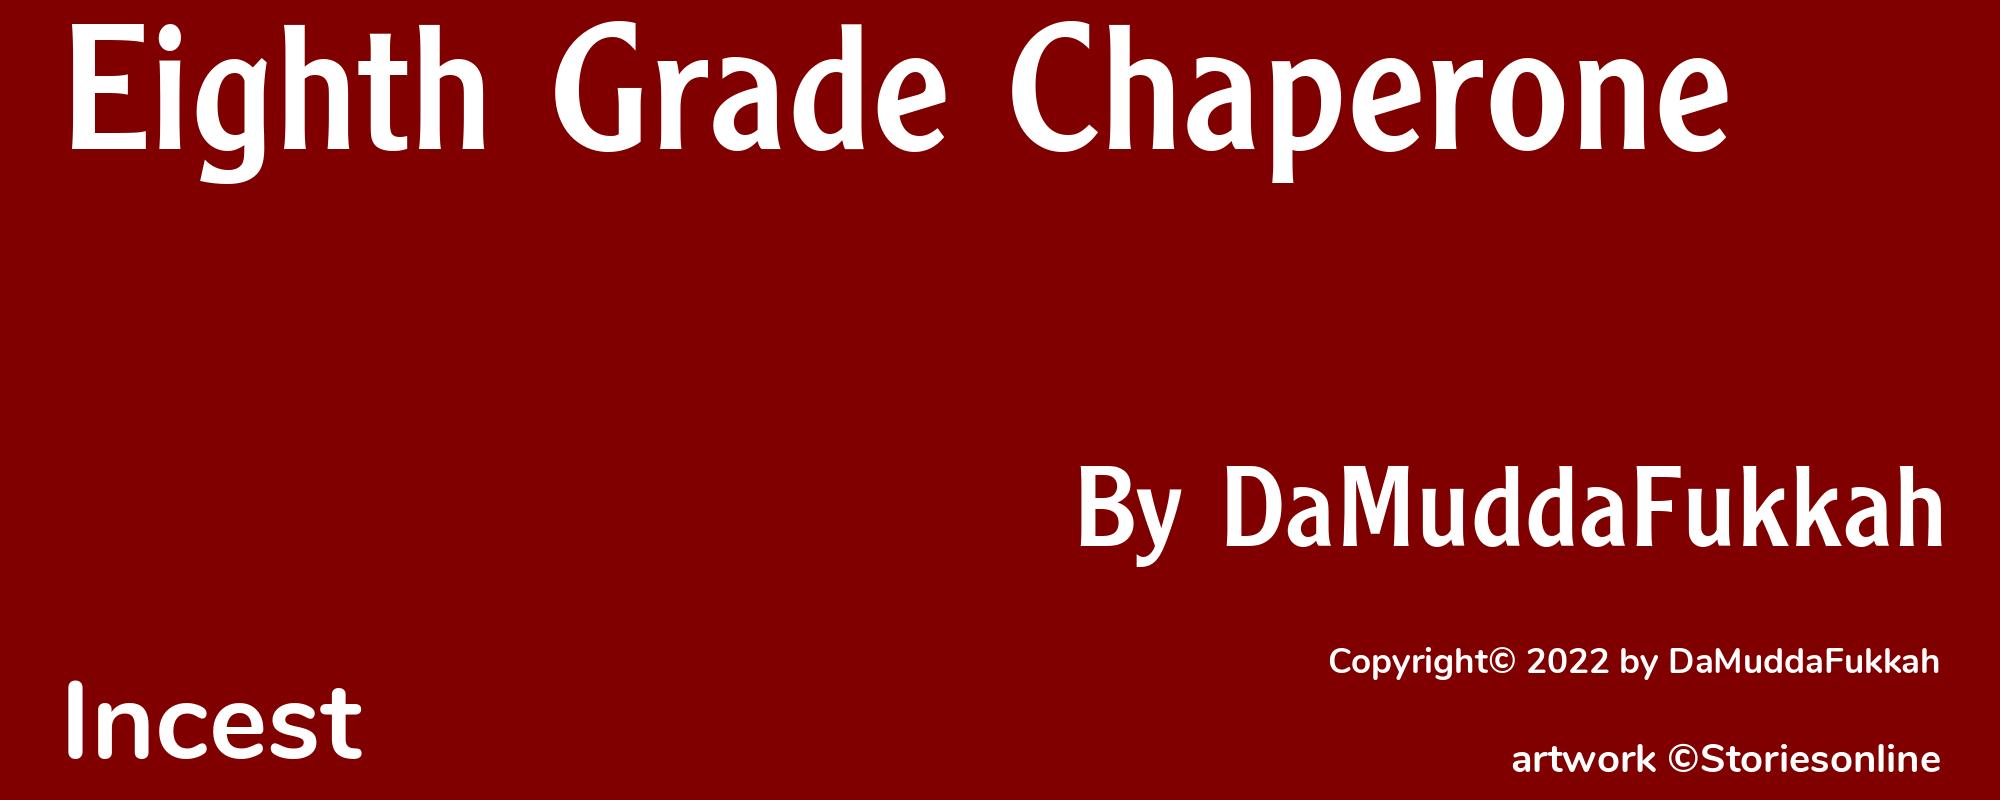 Eighth Grade Chaperone - Cover